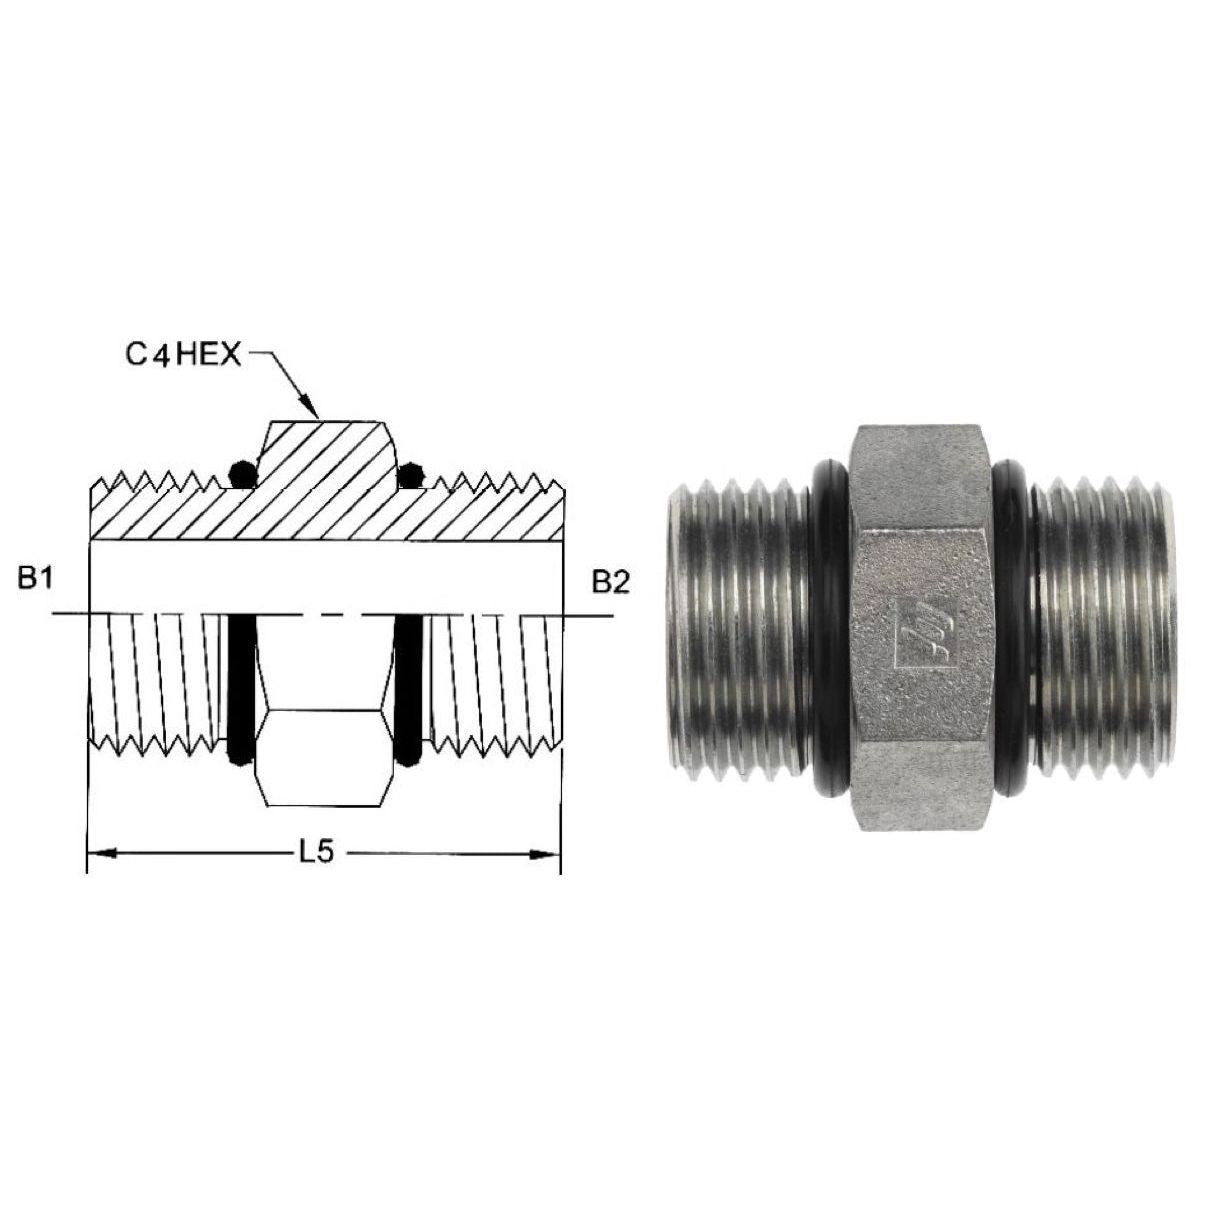 6464-10-08-O : OneHydraulics Straight Adapter, 0.625 (5/8) Male ORB x 0.625 (5/8) Male ORB, Steel